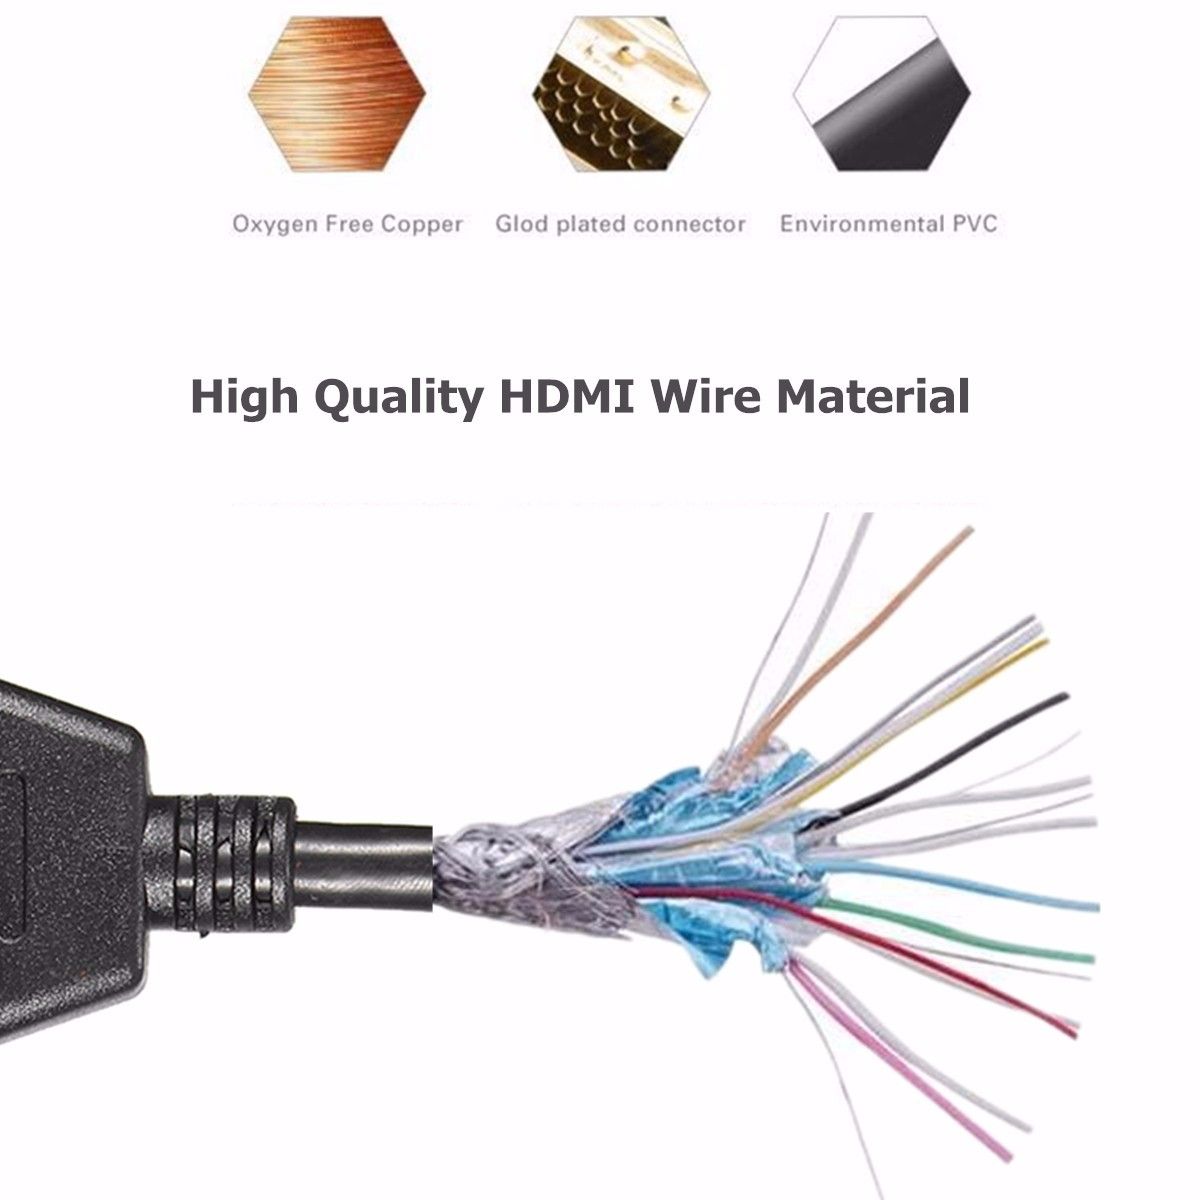 1080P-Micro-HD-Male-to-VGA-Female-Converter-Adapter-Cable-for-PC-HDTV-Monitor-1158371